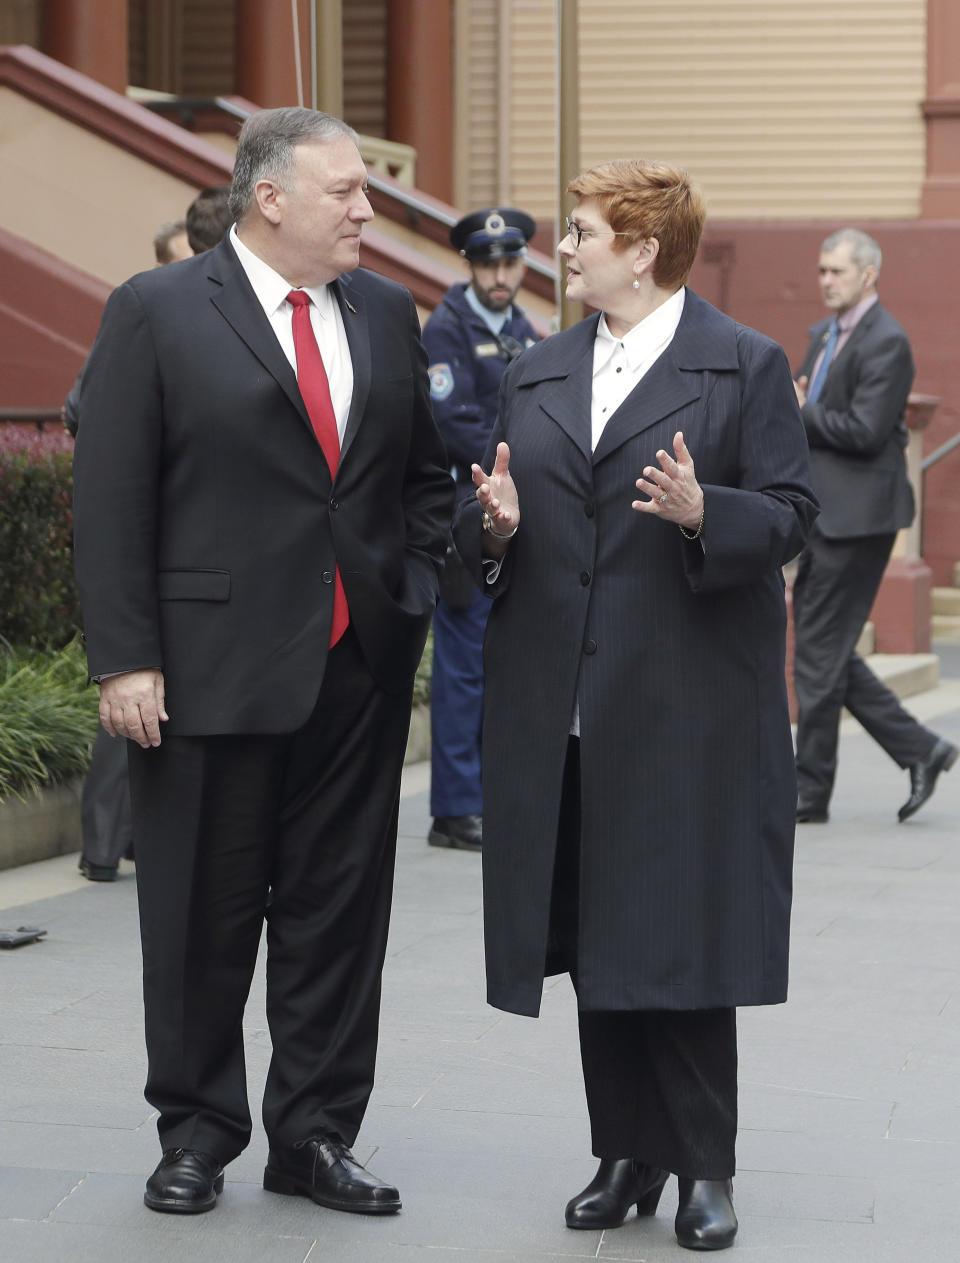 ADDS POOL - U.S. Secretary of State Mike Pompeo, left, and Australian Minister for Foreign Affairs Marise Payne, arrive at New South Wales state parliament in Sydney, Australia, Sunday, Aug. 4, 2019, for annual bilateral talks. (AP Photo/Rick Rycroft, Pool)